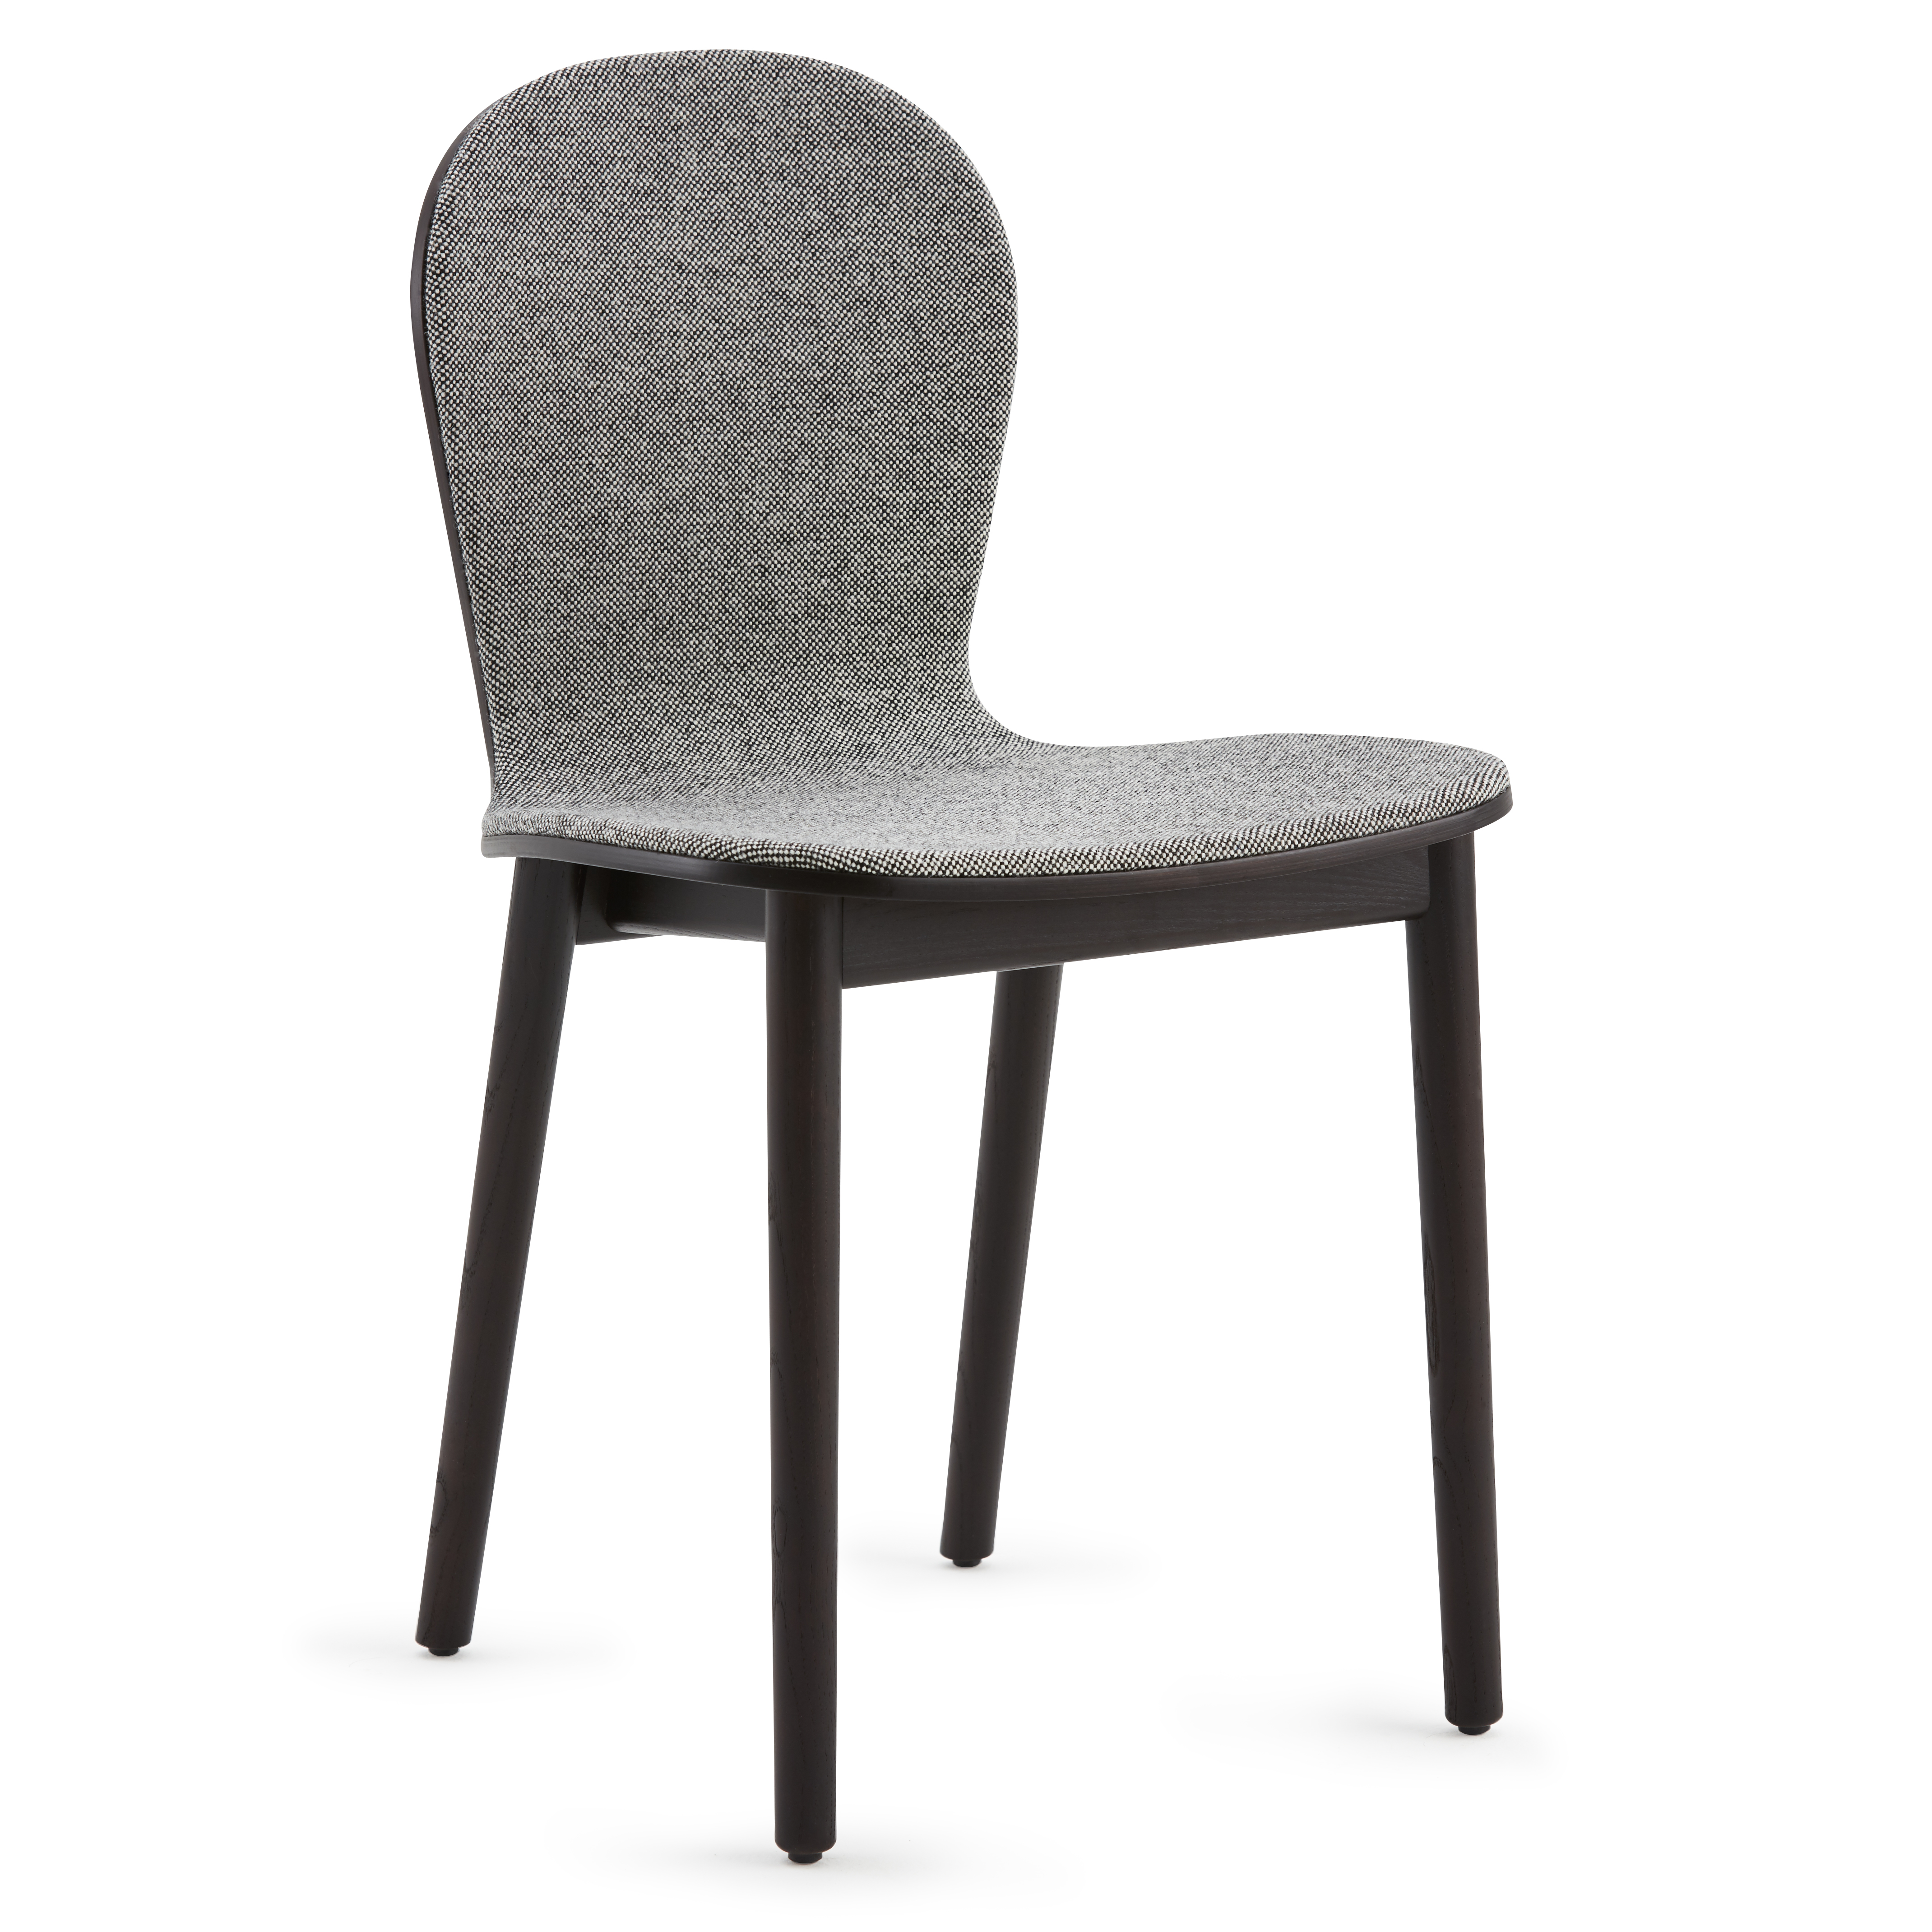 Haworth Bac Two side chair in grey and dark brown 